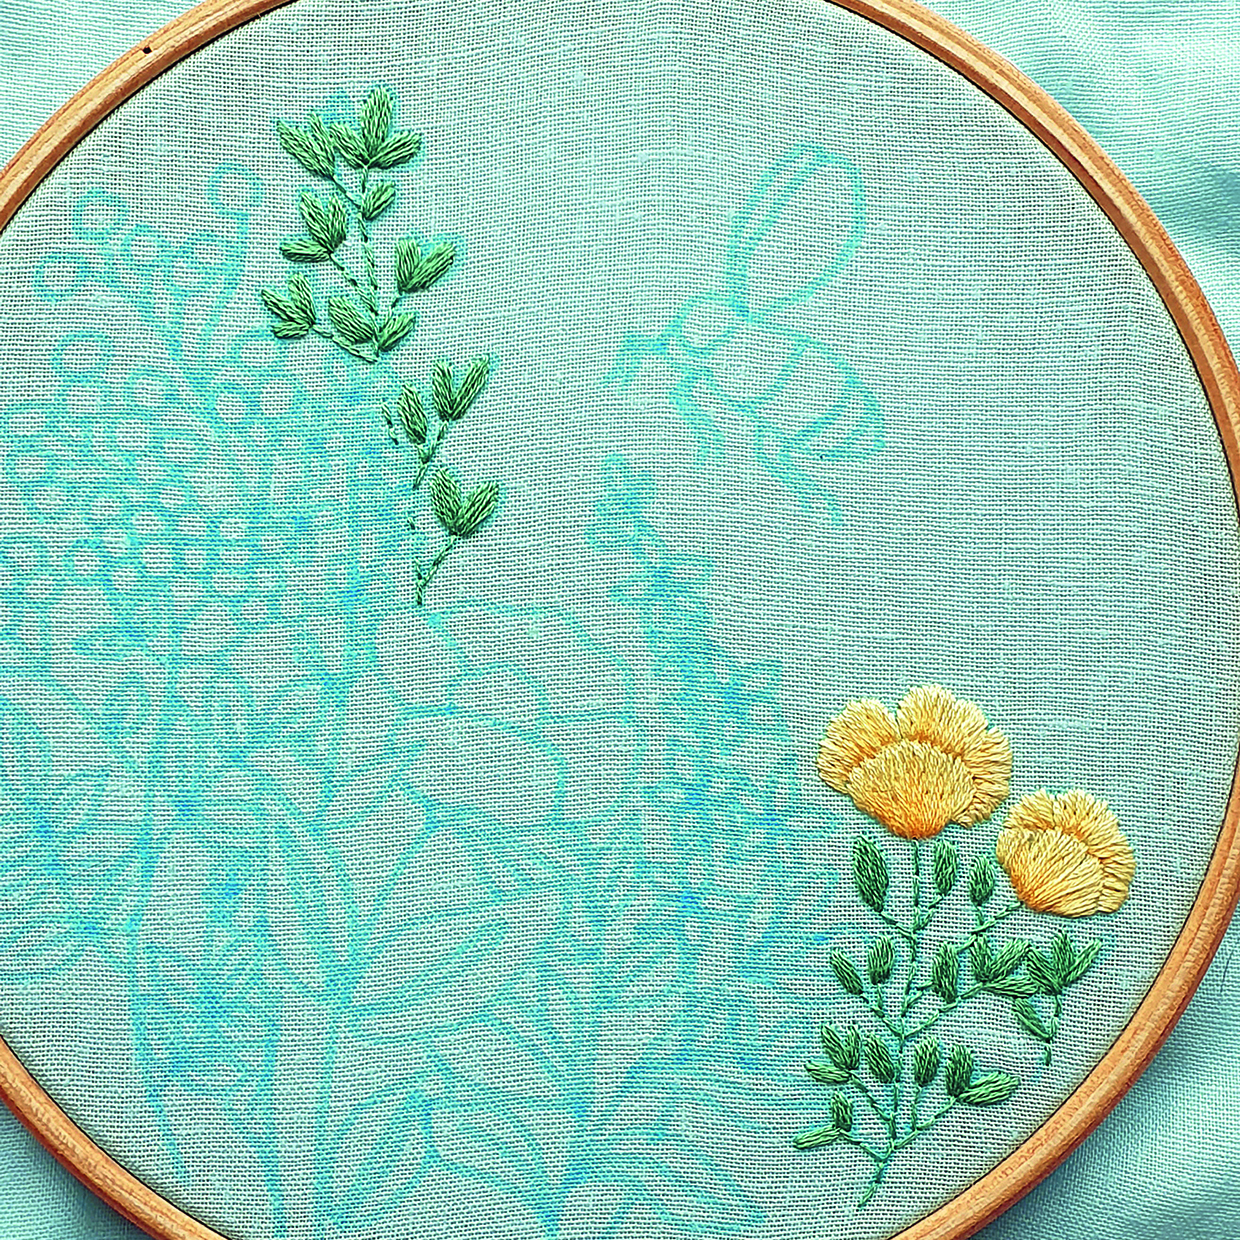 bumble bee embroidery step 3